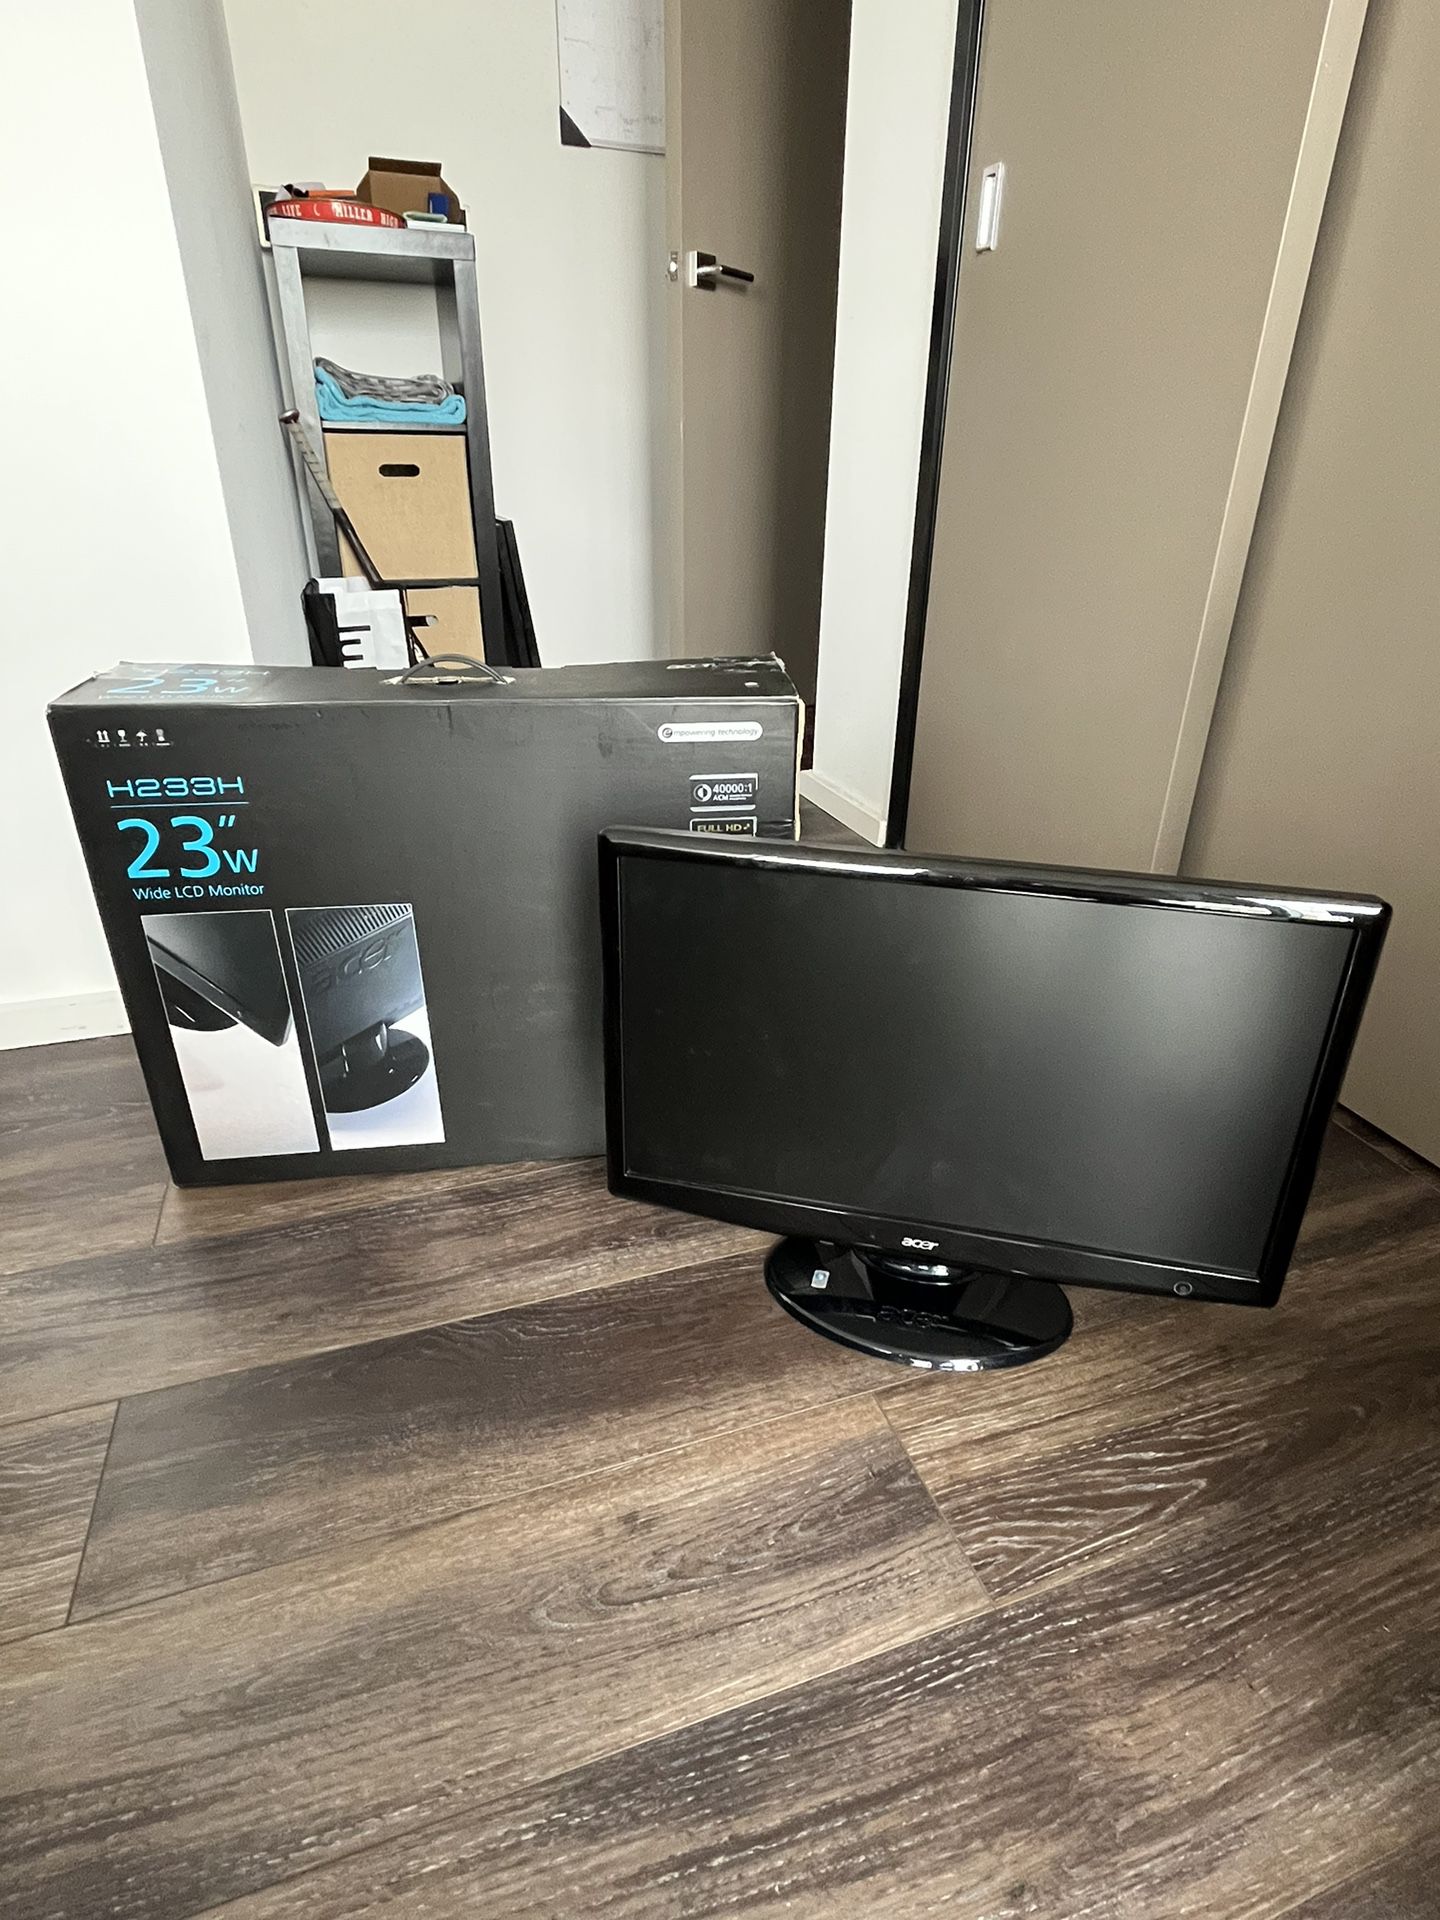 23” ACER LCD Monitor (HDMI Chord Included)